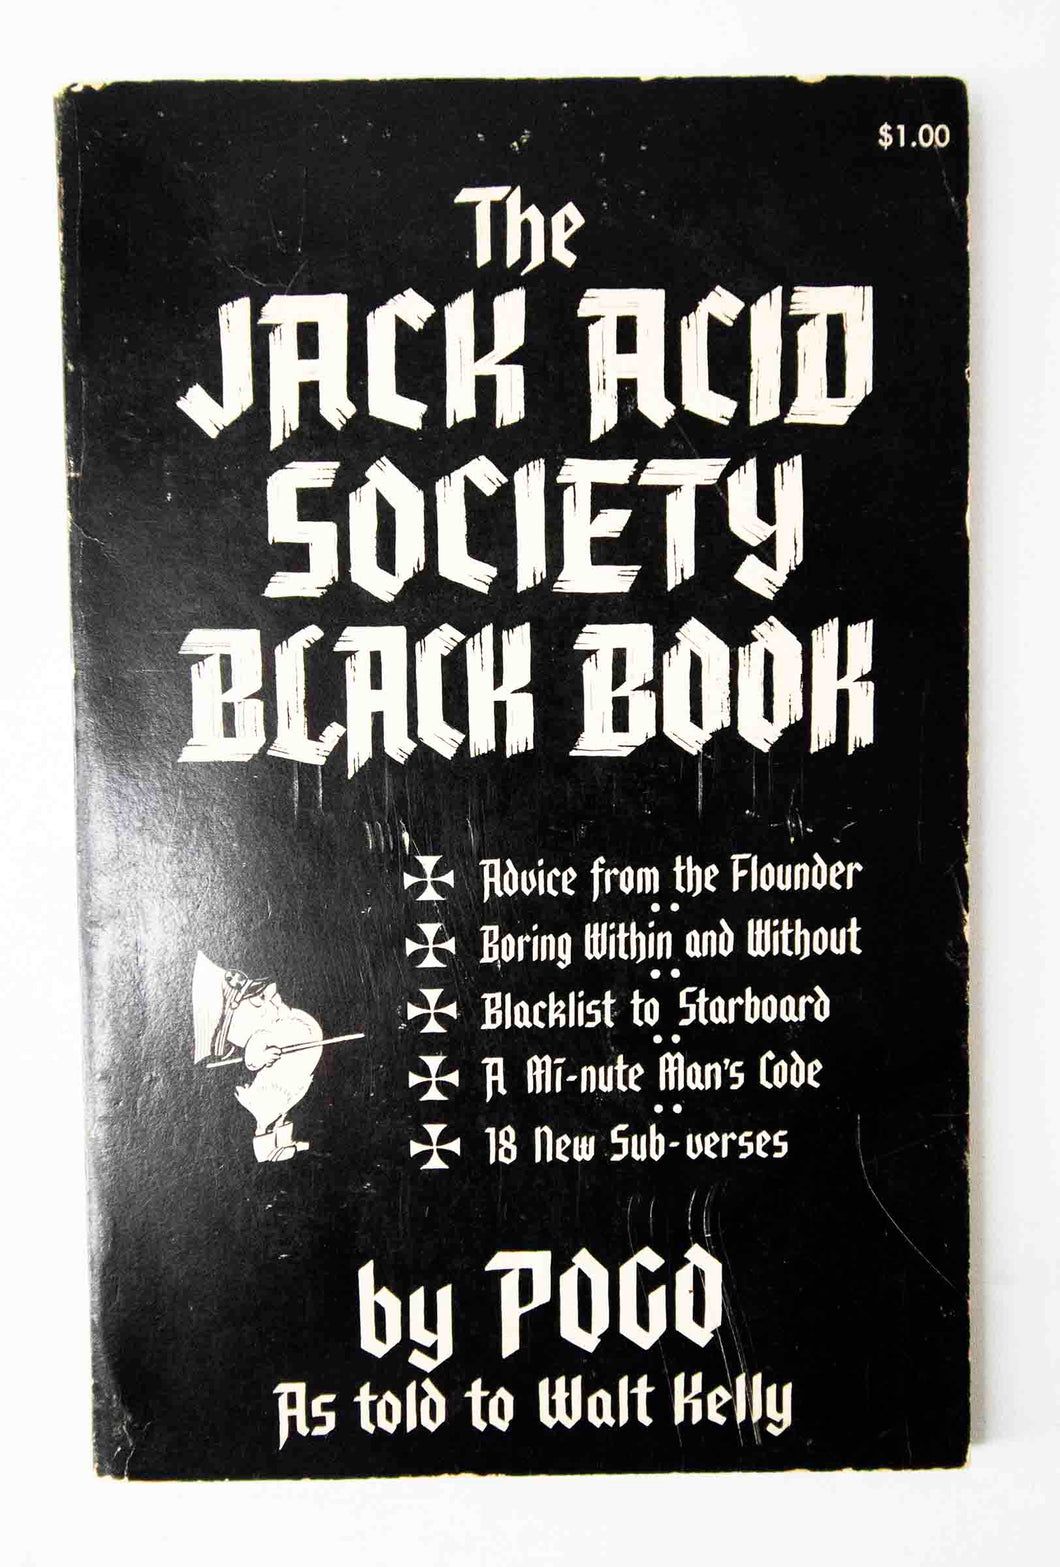 Comic Book Indy - Simon & Schuster:  The Jack Acid Society Black Book - By:  POGO (As Told To Walt Kelly) - 4th Printing / 1957, 1961, & 1962 - Political / Humor / Illustration - Adult Content / Mature Reader - Indy  - USED / VG+ - RARE